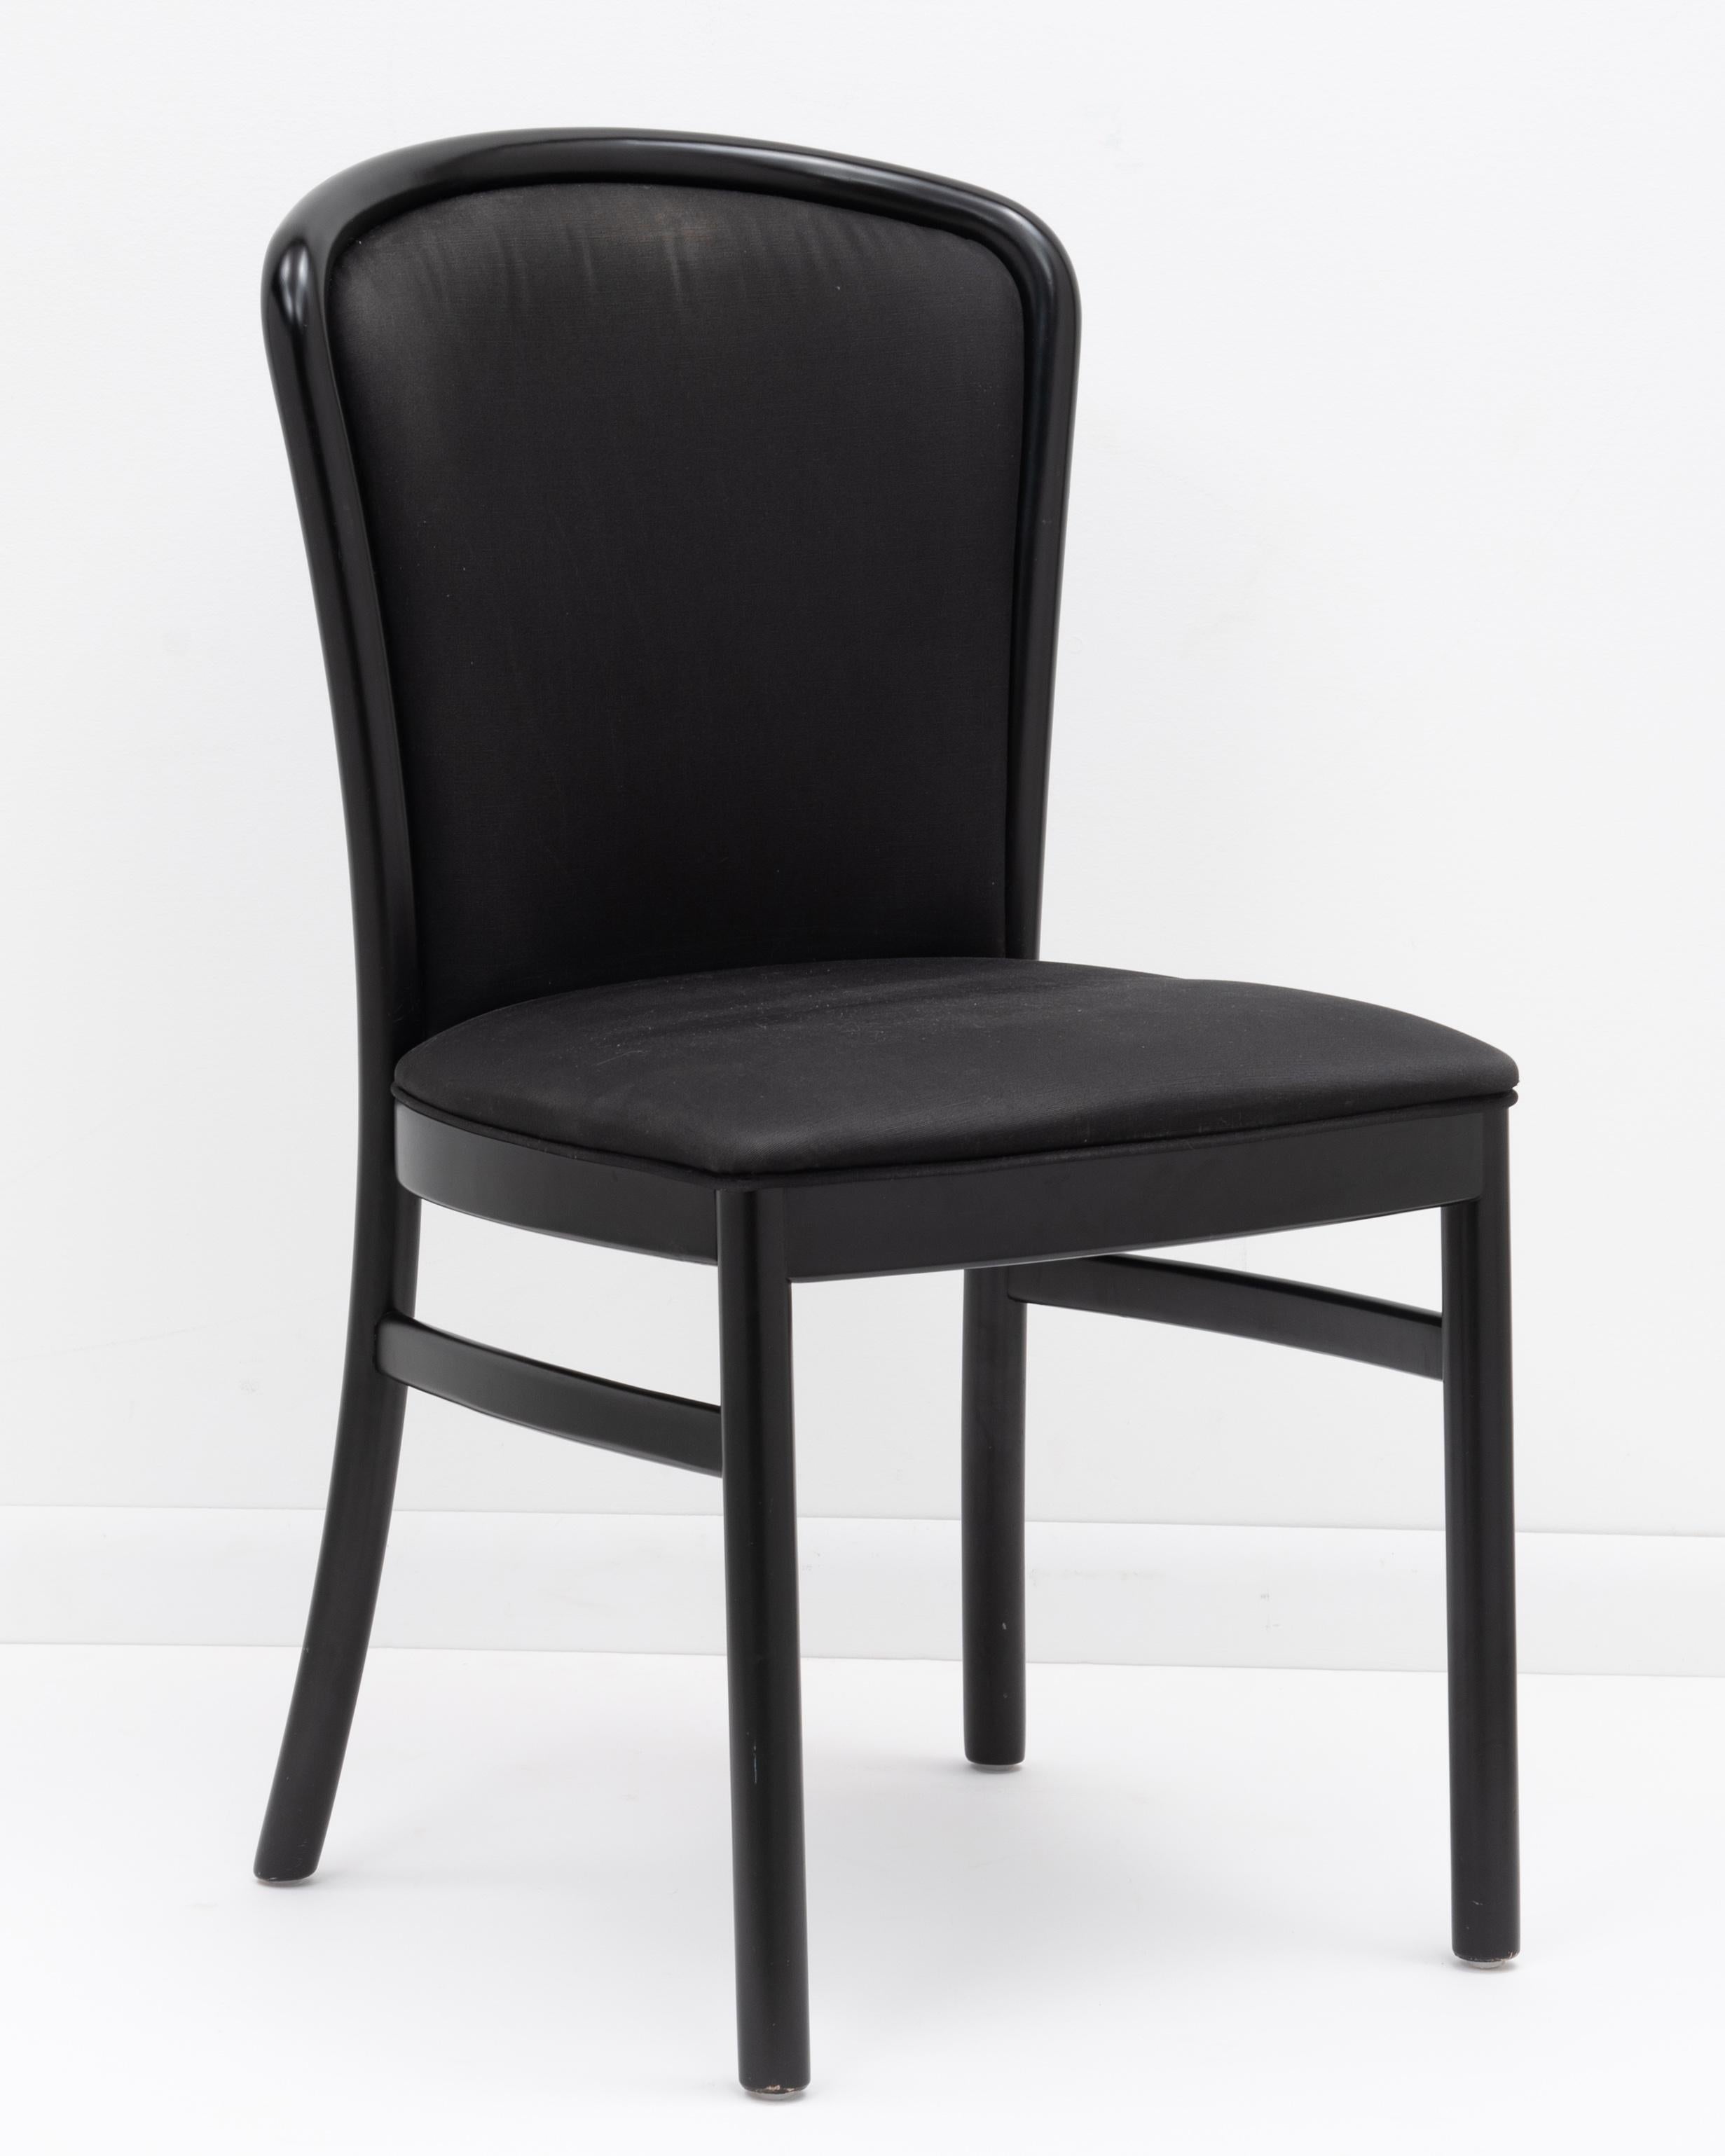 Postmodern Italian Black Lacquer Tonon Dining Chairs Ello - a Set of Ten In Good Condition For Sale In Forest Grove, PA